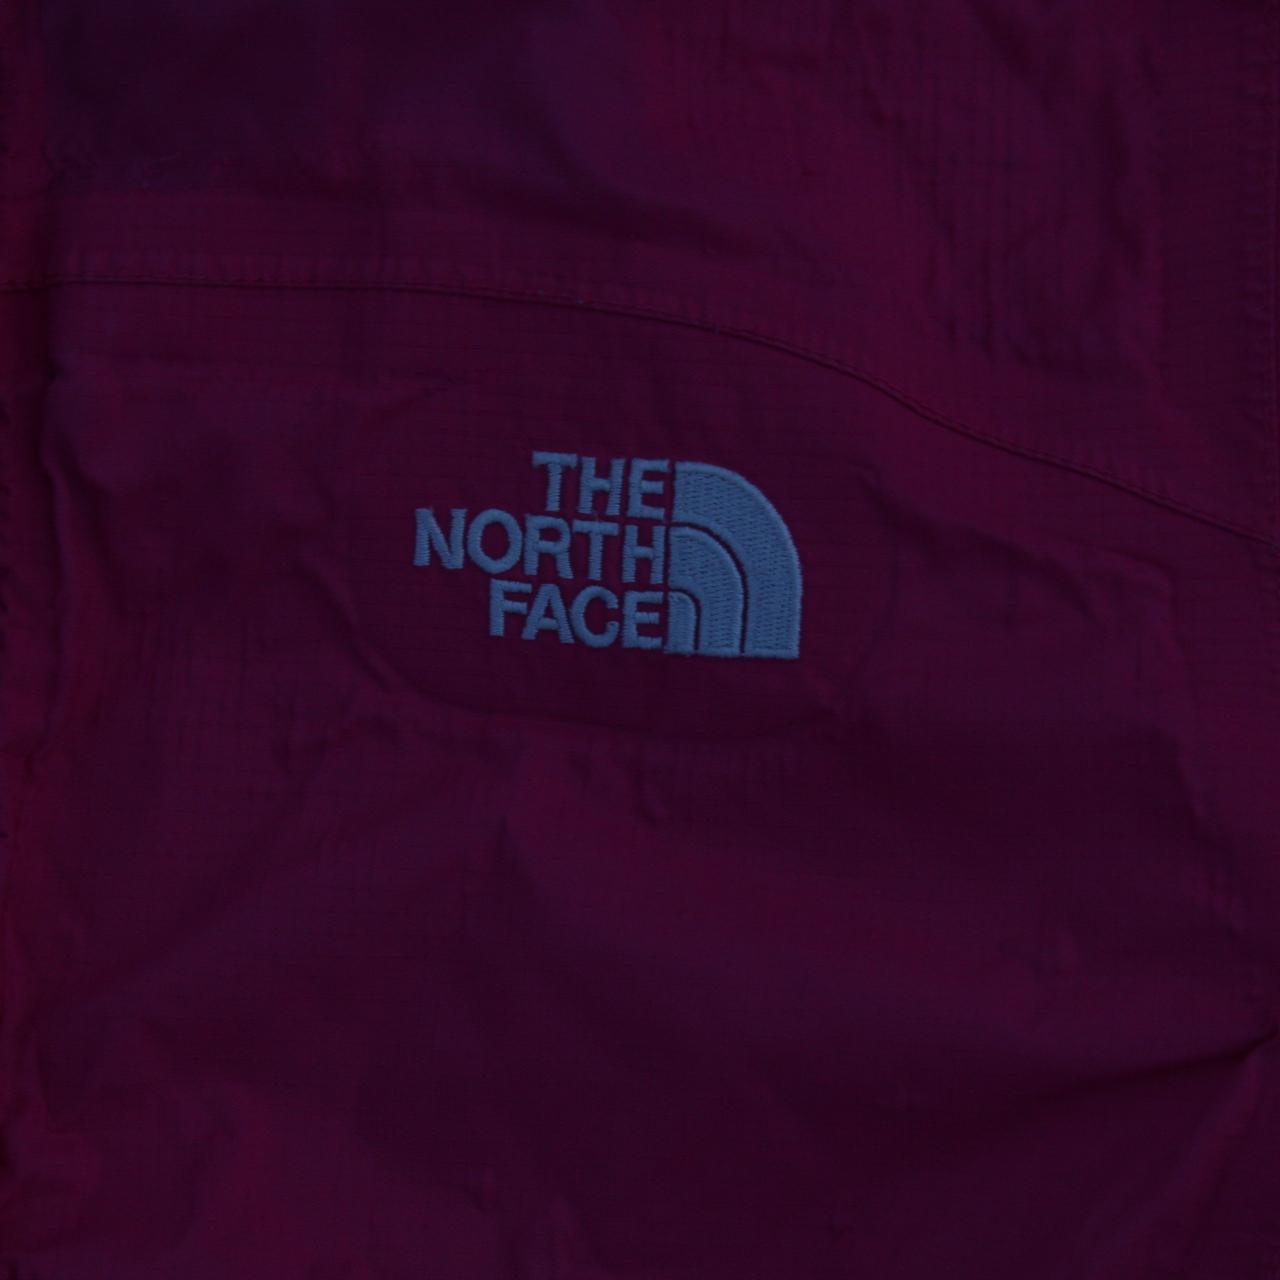 The North Face Women's Pink Jacket (2)